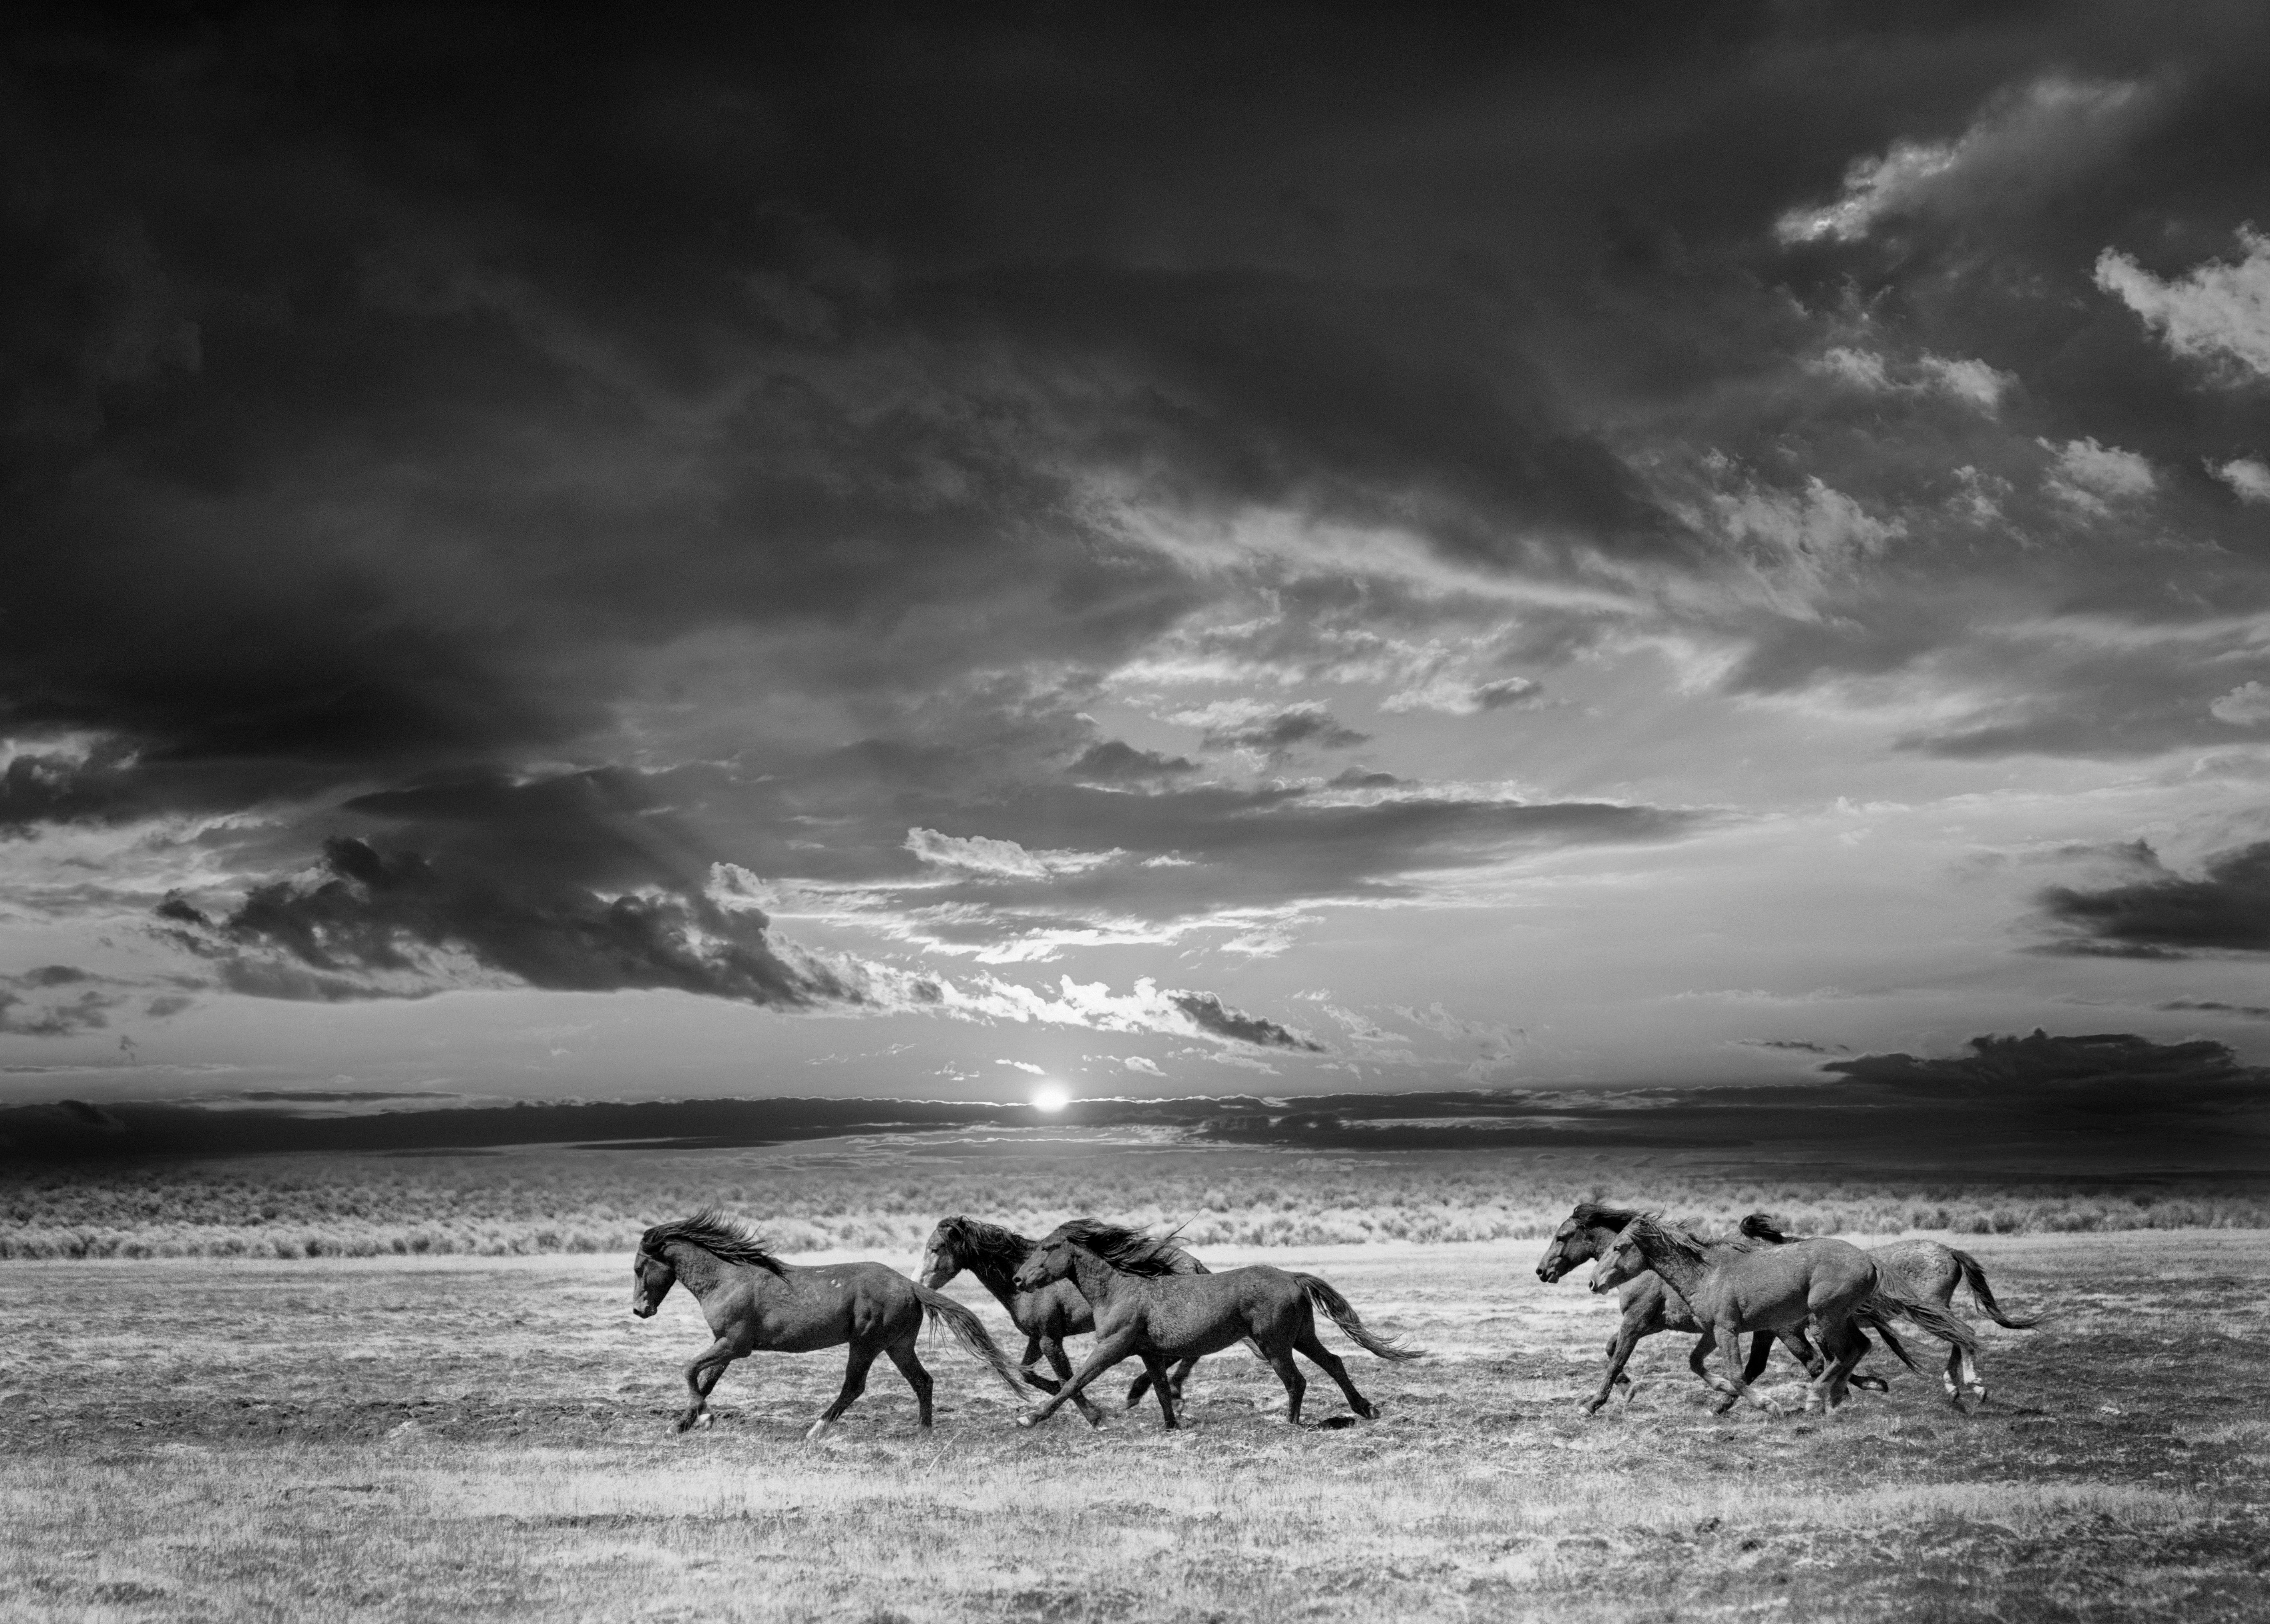 Shane Russeck Black and White Photograph - Chasing the Light  18x24 - Contemporary Black & White Poster of Wild Horses